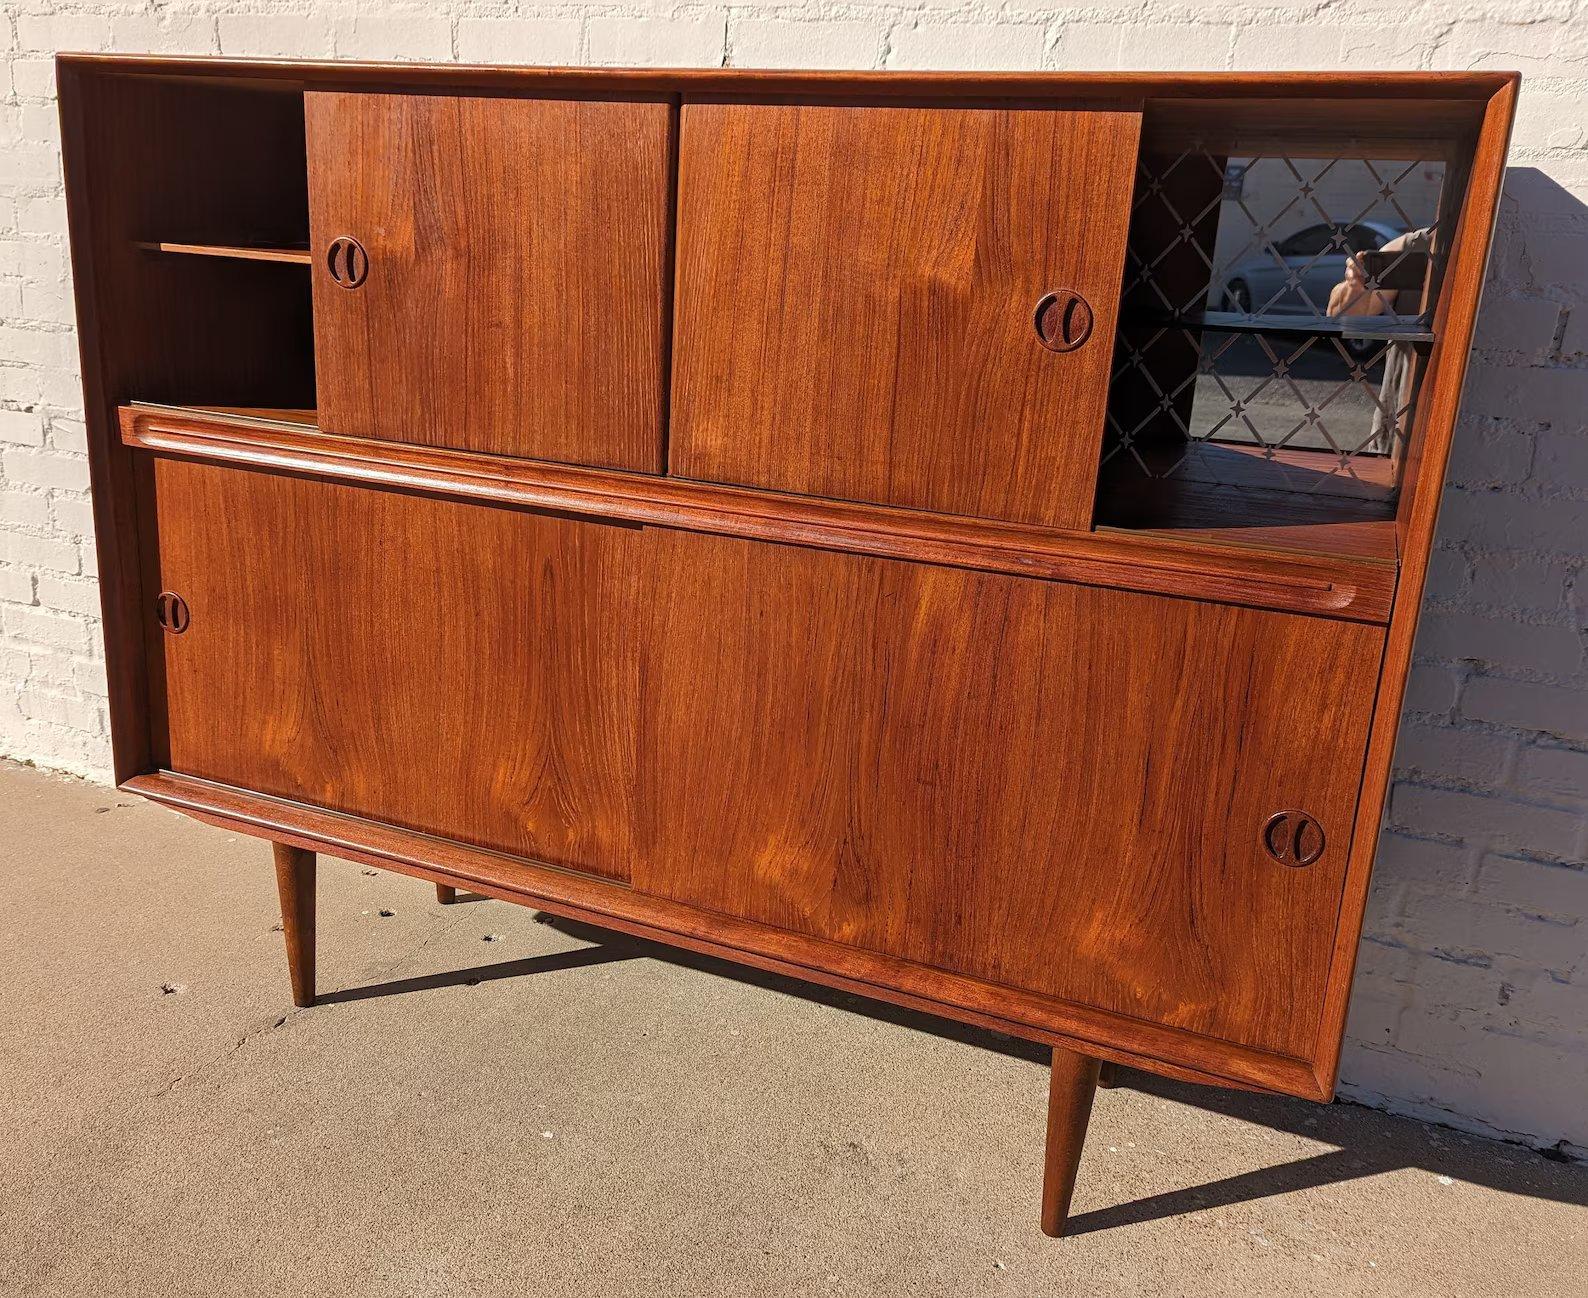 Mid Century Danish Modern Teak Cocktail Cabinet

Above average vintage condition and structurally sound. Has some expected slight finish wear and scratching. Has a couple small edge dings. Outdoor listing pictures might appear slightly darker or